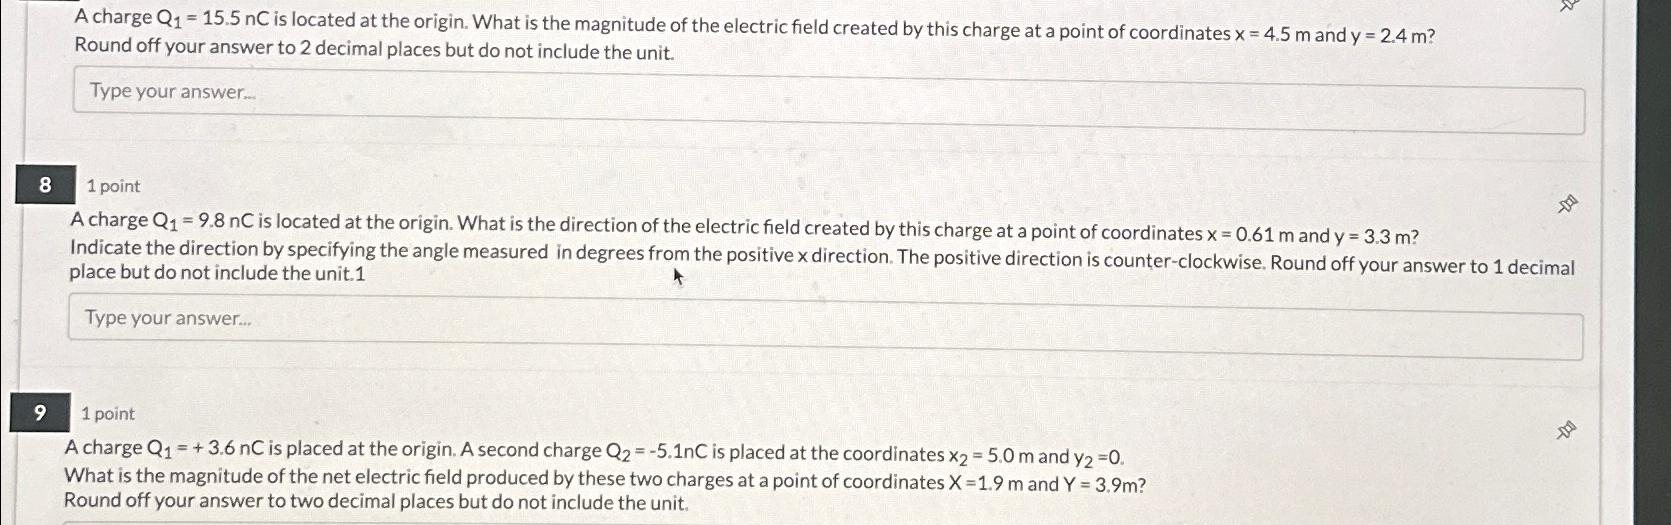 A charge Q = 15.5 nC is located at the origin. What is the magnitude of the electric field created by this